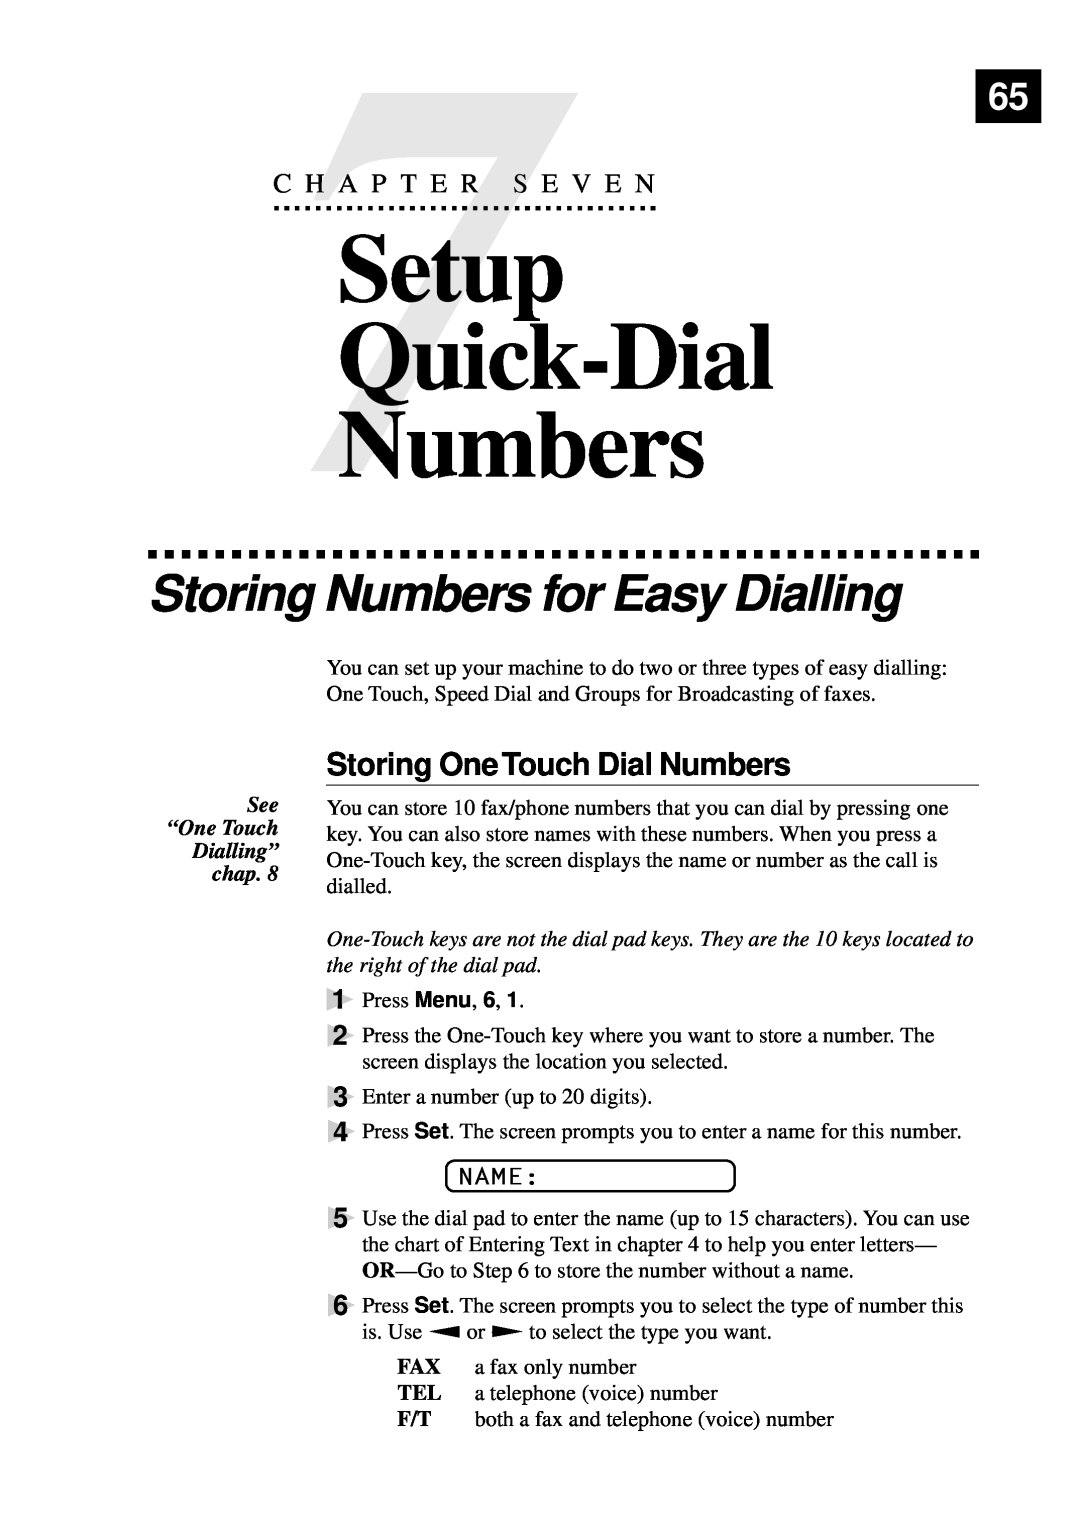 Brother 515 manual Setup Quick-Dial Numbers, Storing Numbers for Easy Dialling, Storing One Touch Dial Numbers, Name 